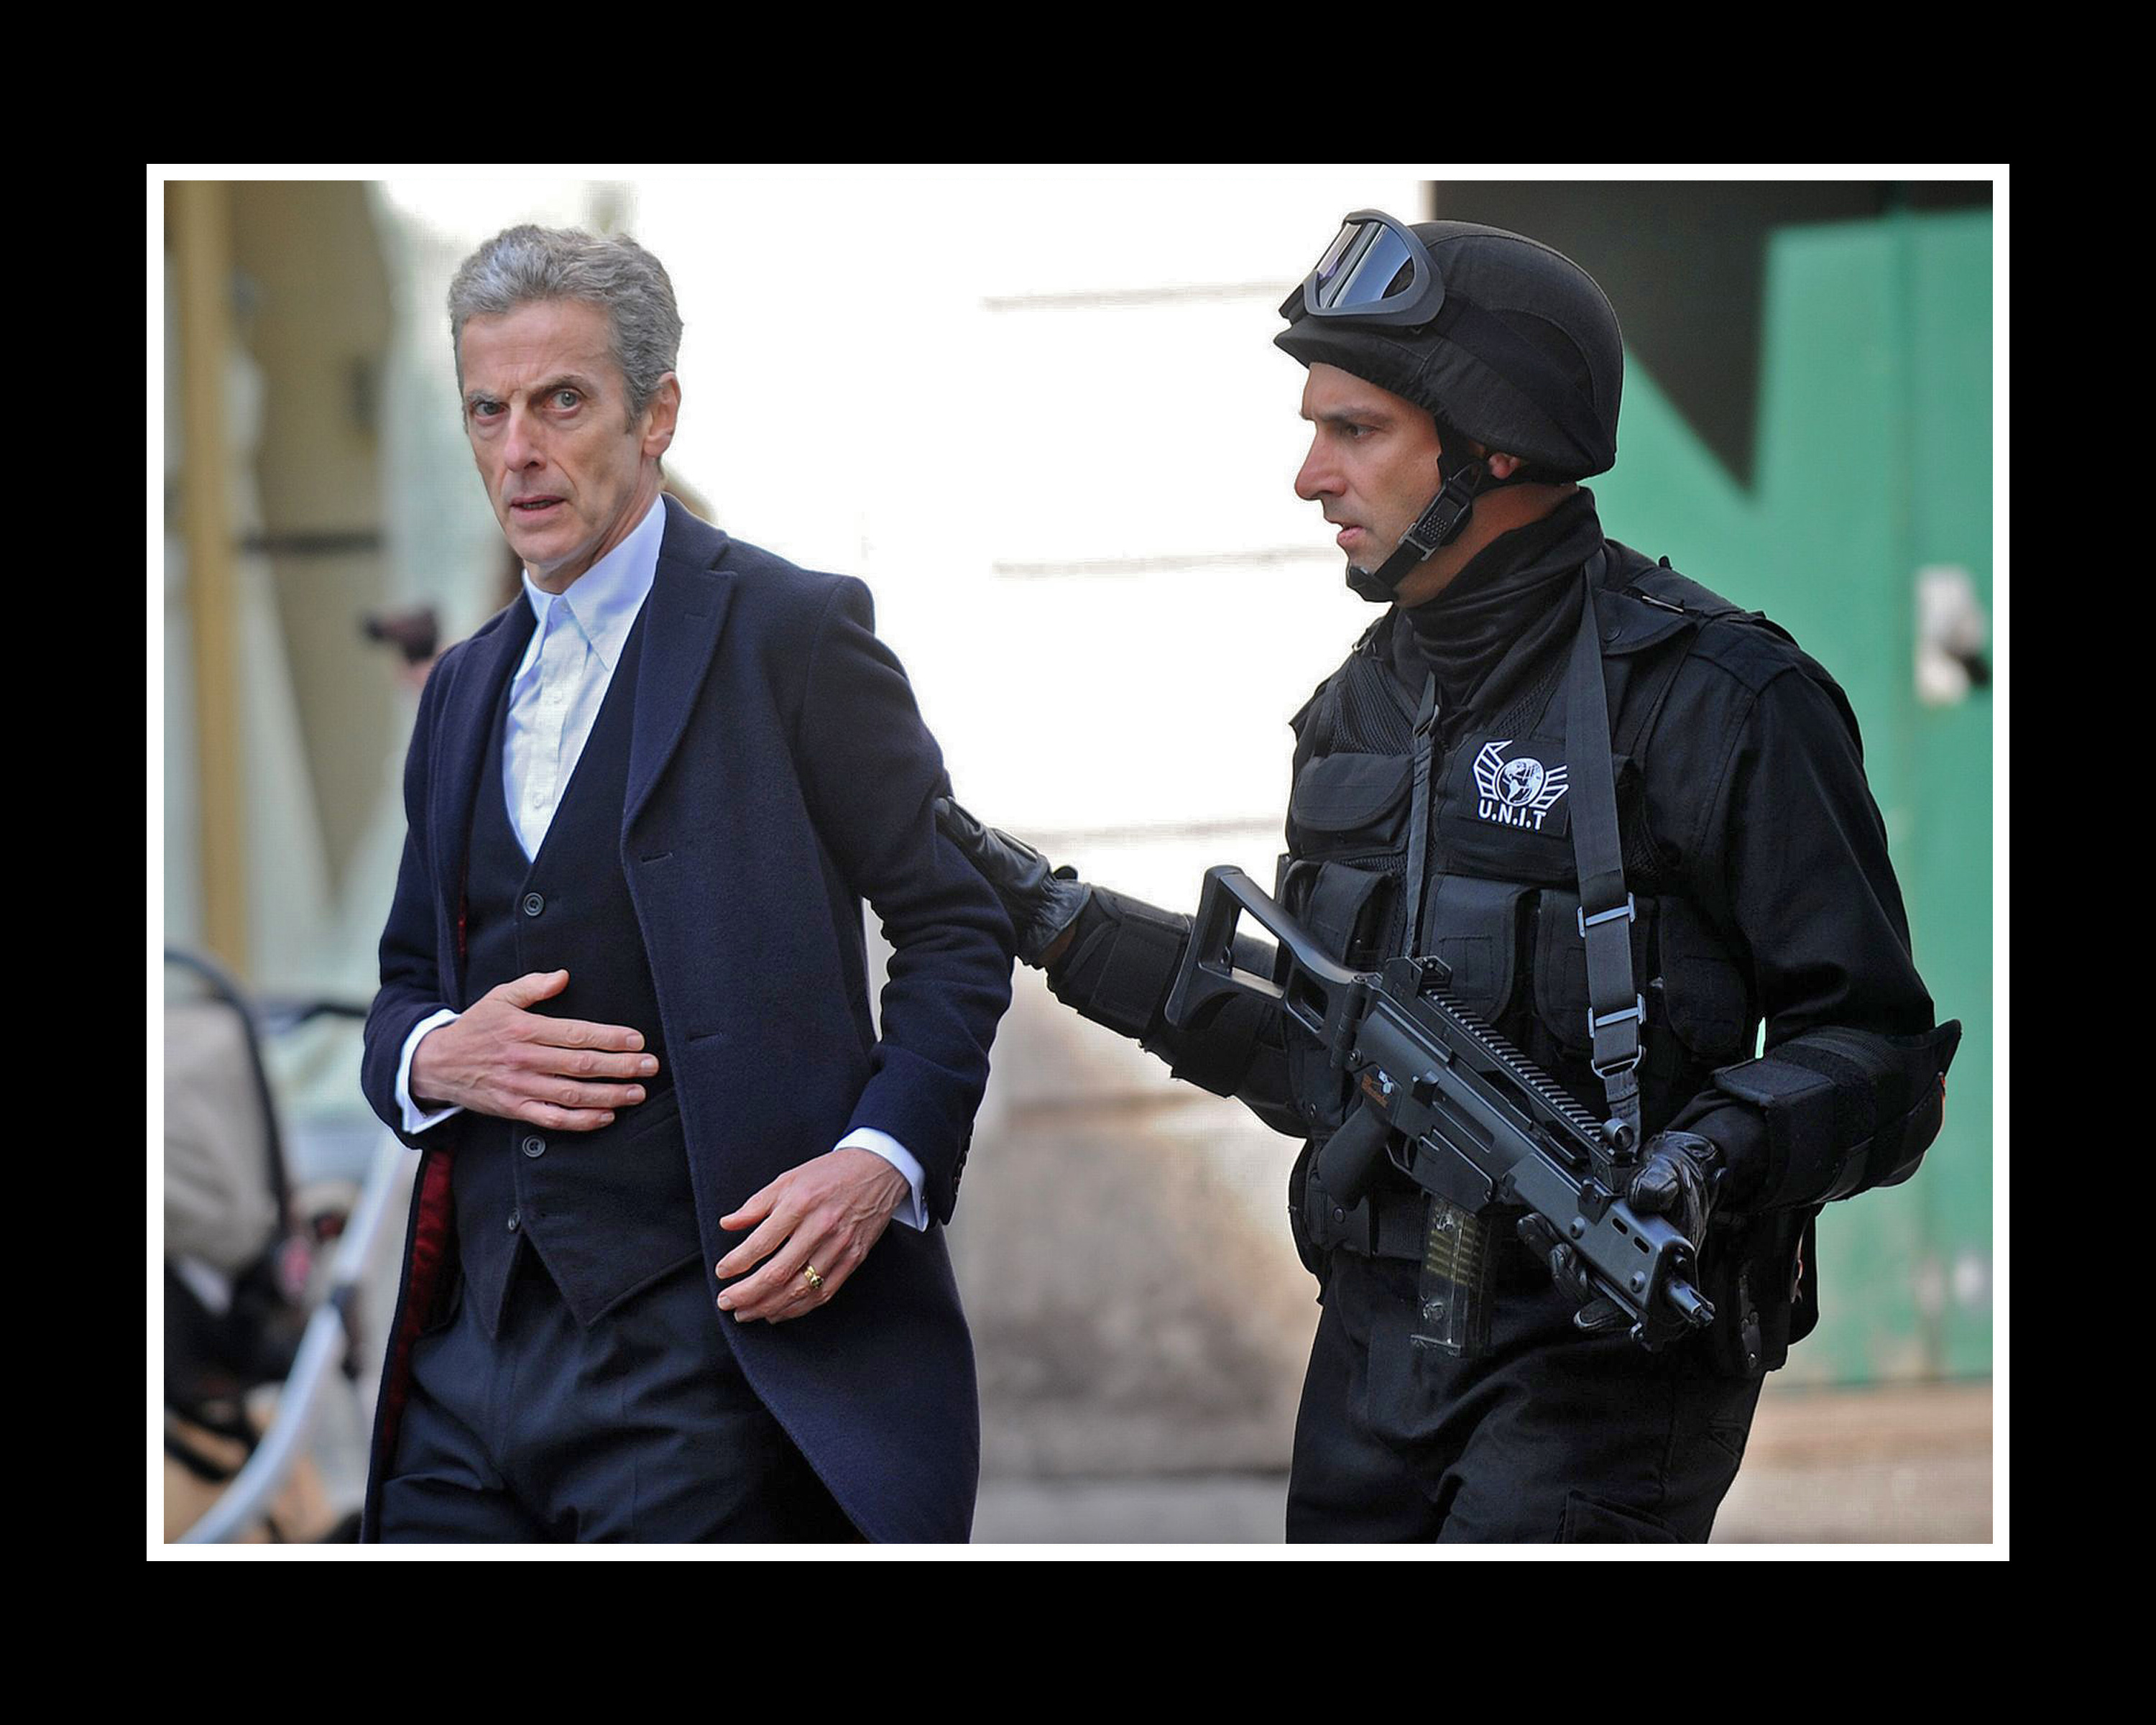 Jon with Peter Capaldi (The 12th Doctor) in 